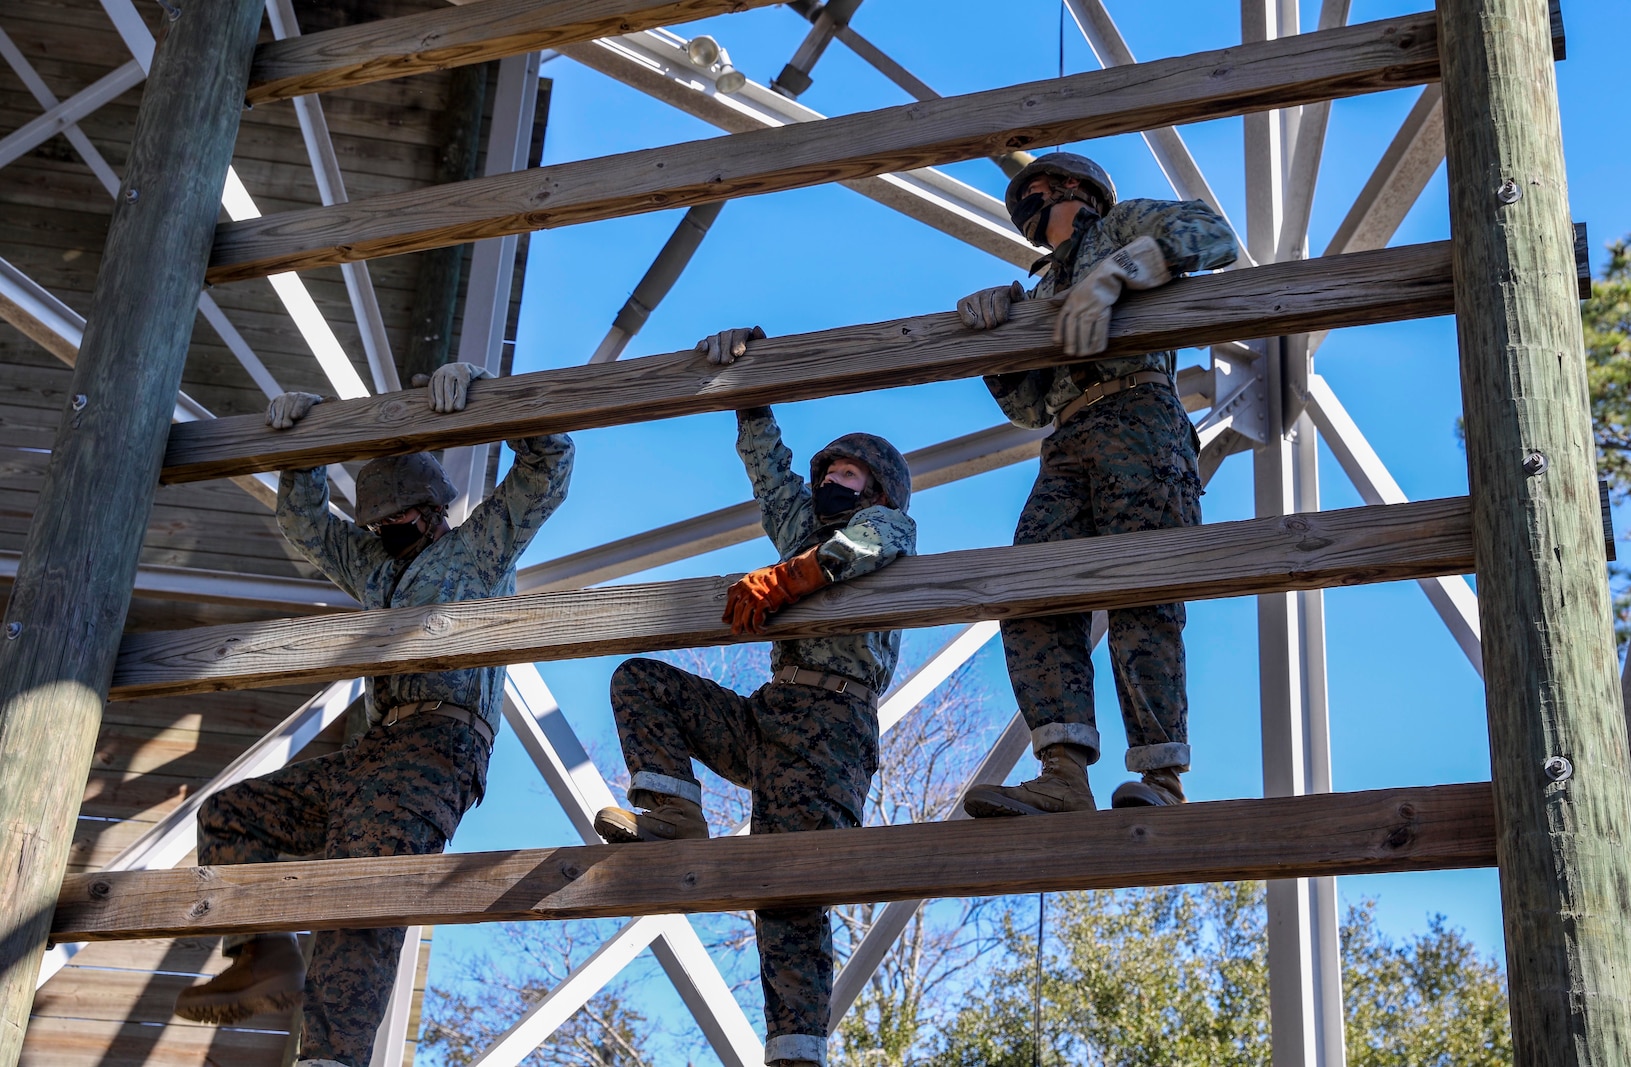 Recruits with Papa Company, 4th Recruit Training Battalion, learn how to properly rappel from the rappel tower at Marine Corps Recruit Depot Parris Island, S.C., Jan. 19, 2021. The rappel tower is used to teach the recruits to overcome fear and trust their equipment. (U.S. Marine Corps photo by Lance Cpl. Godfrey Ampong)